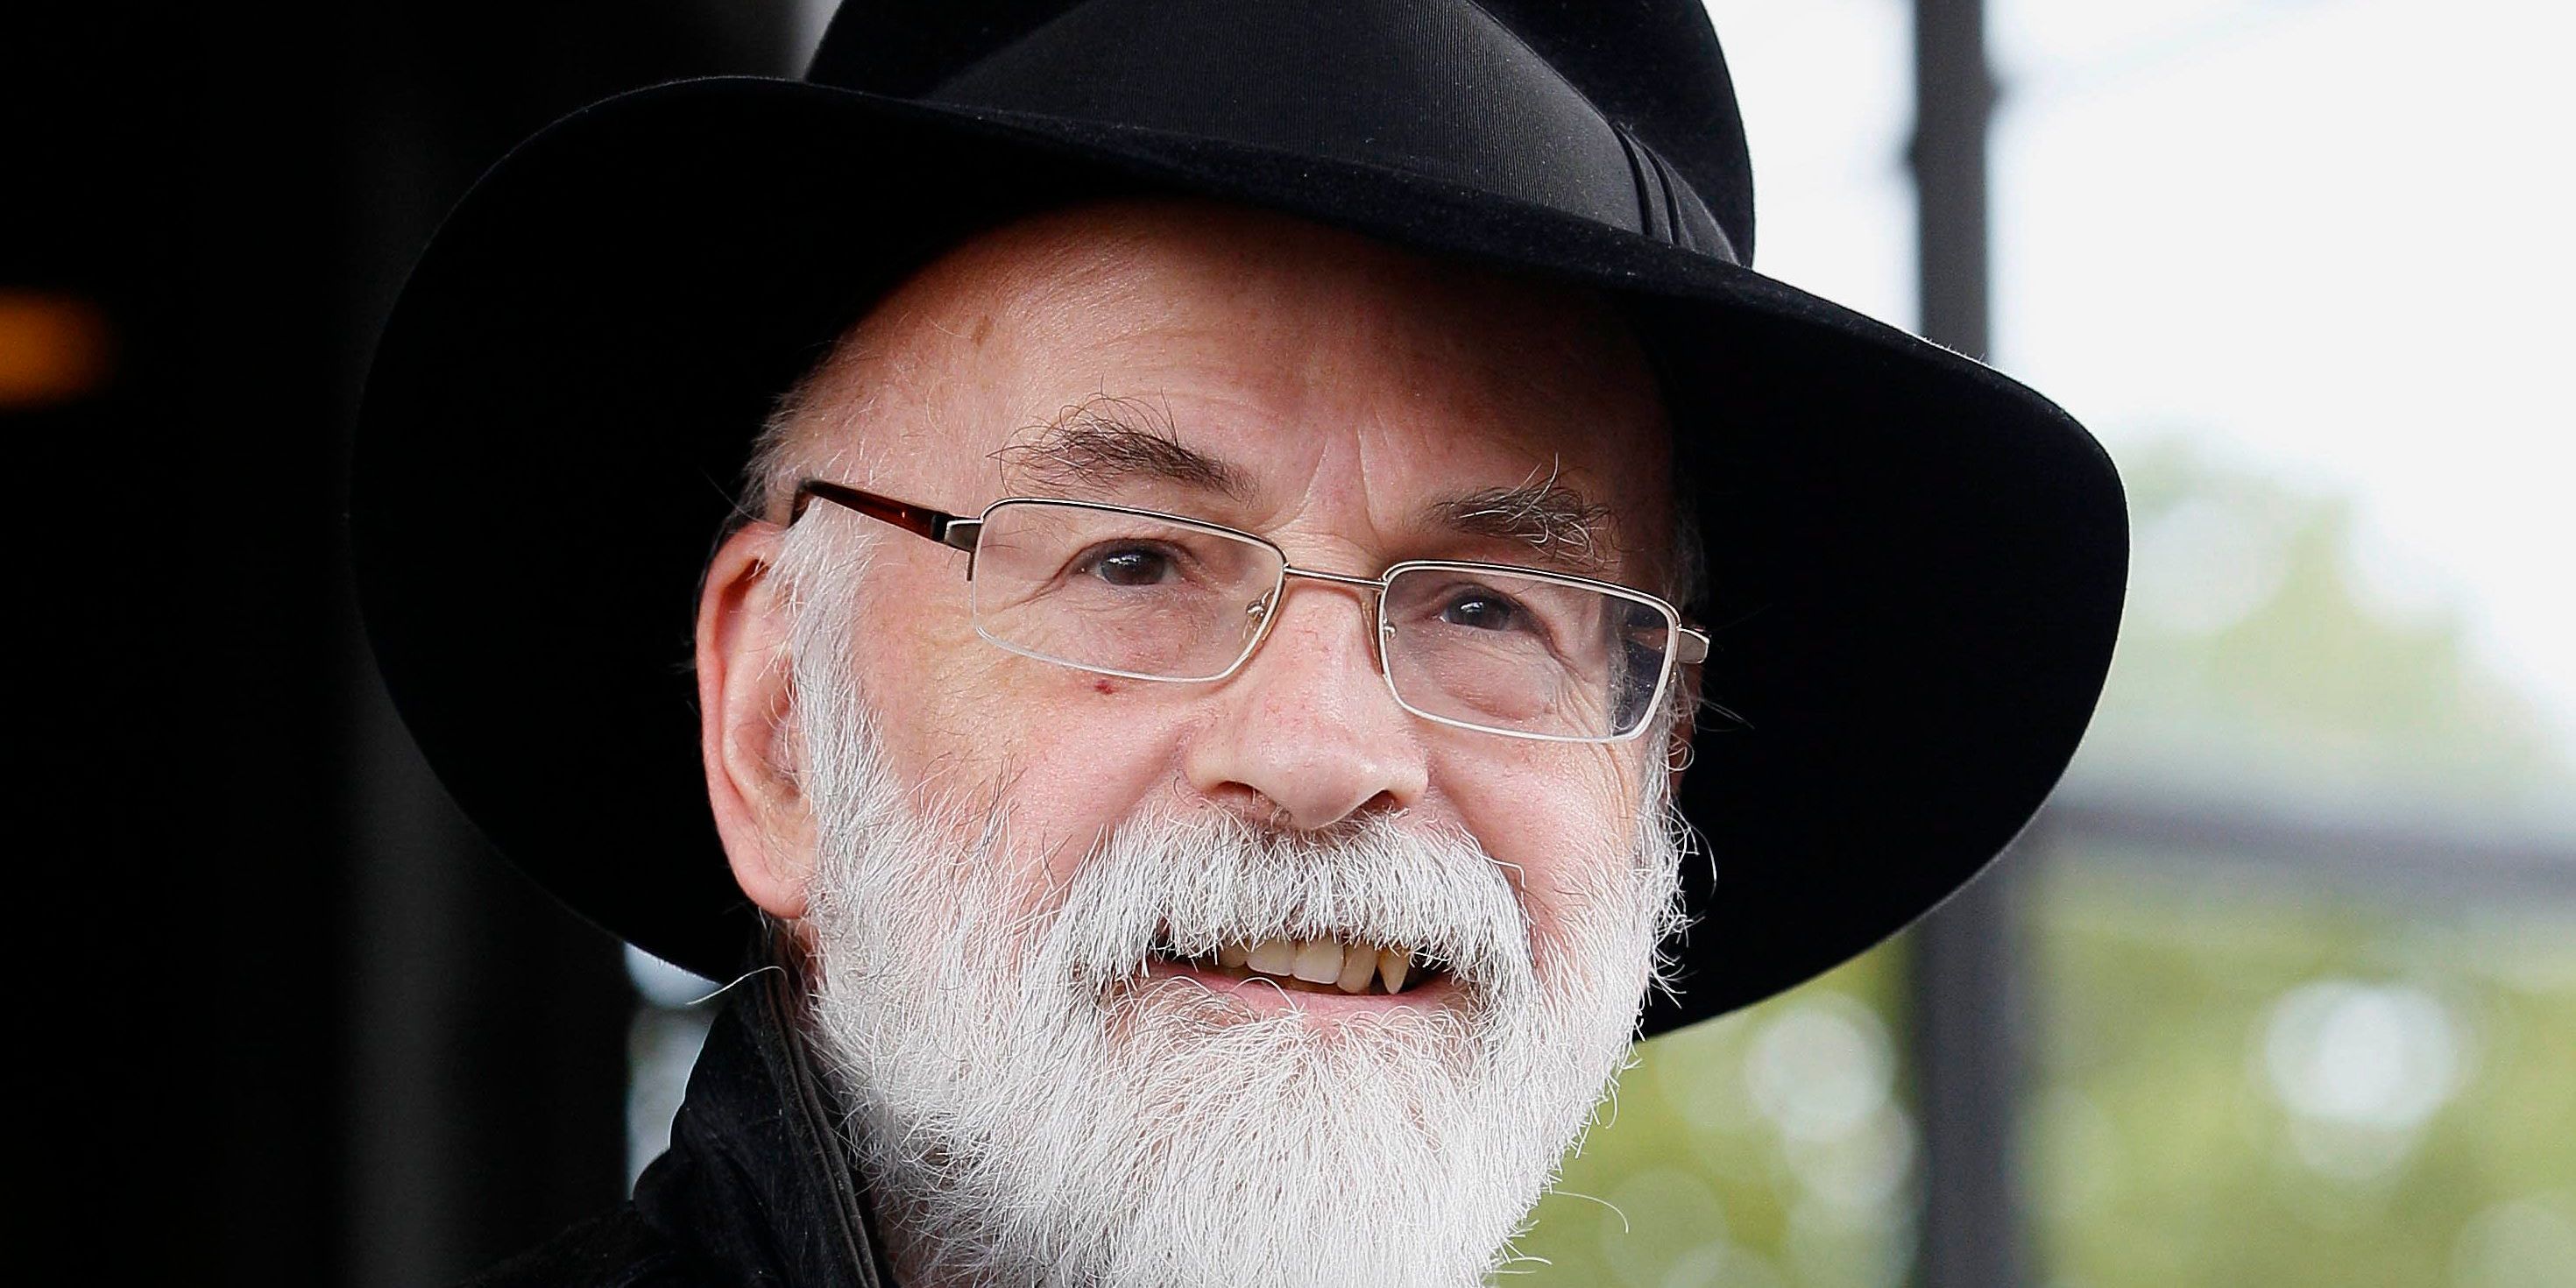 The Estate of Terry Pratchett joins RCW